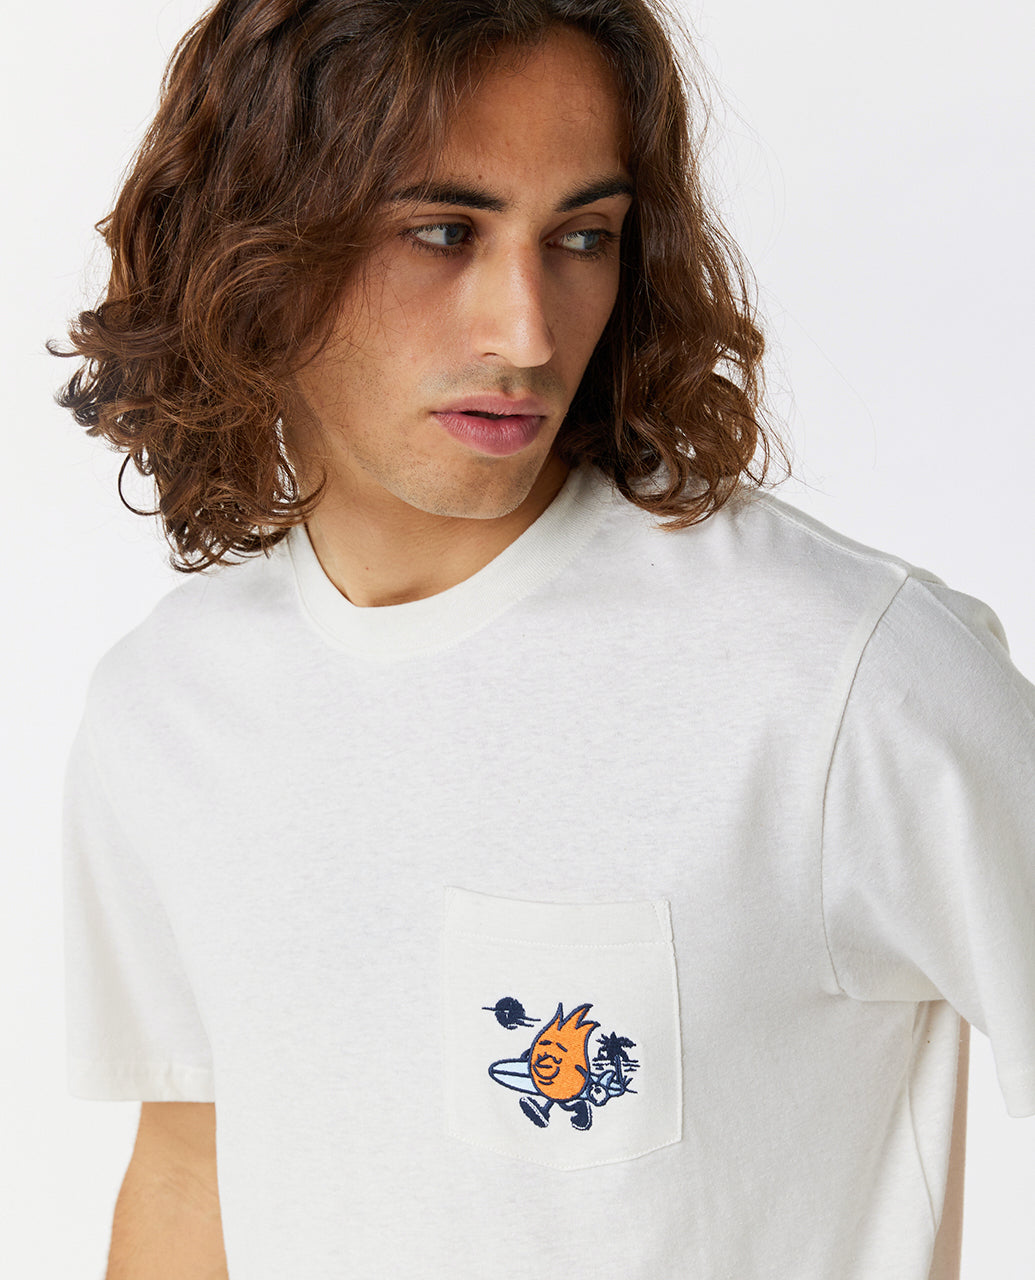 SHAPER EMBROIDERY SS TEE